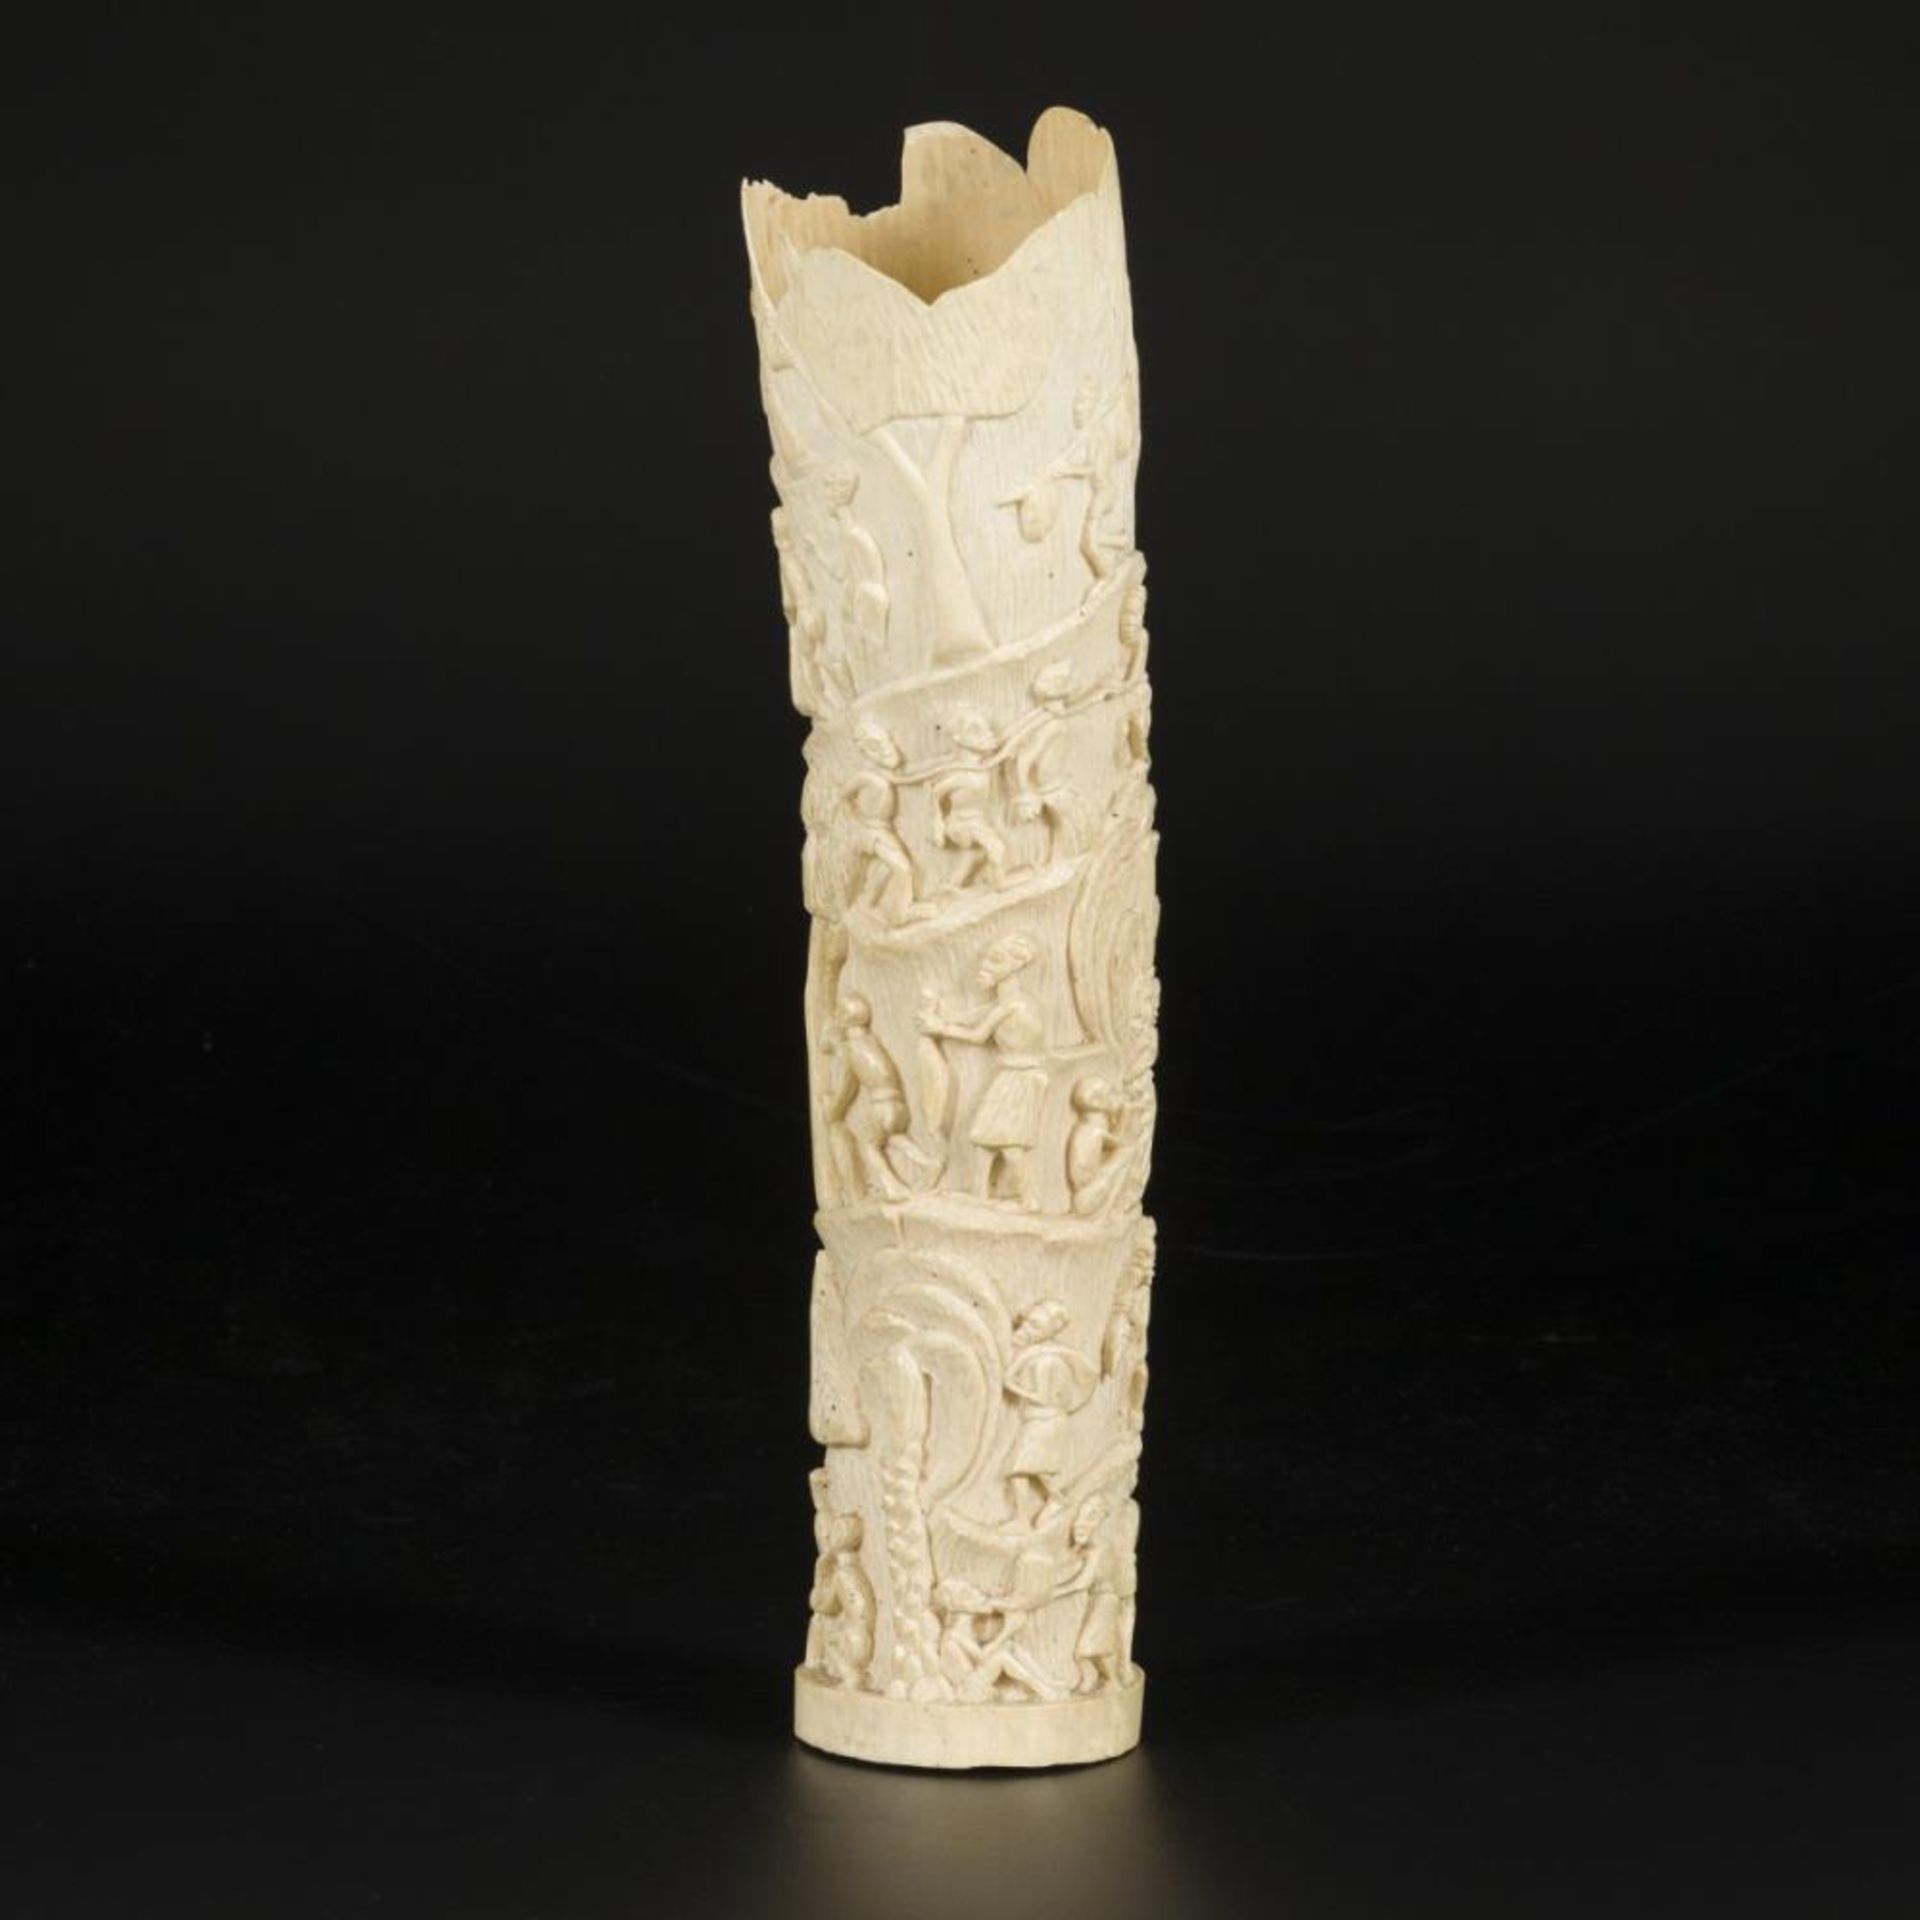 An ivory carving with depictions of African villagers, DRC, ca. 1920/30. - Image 3 of 6